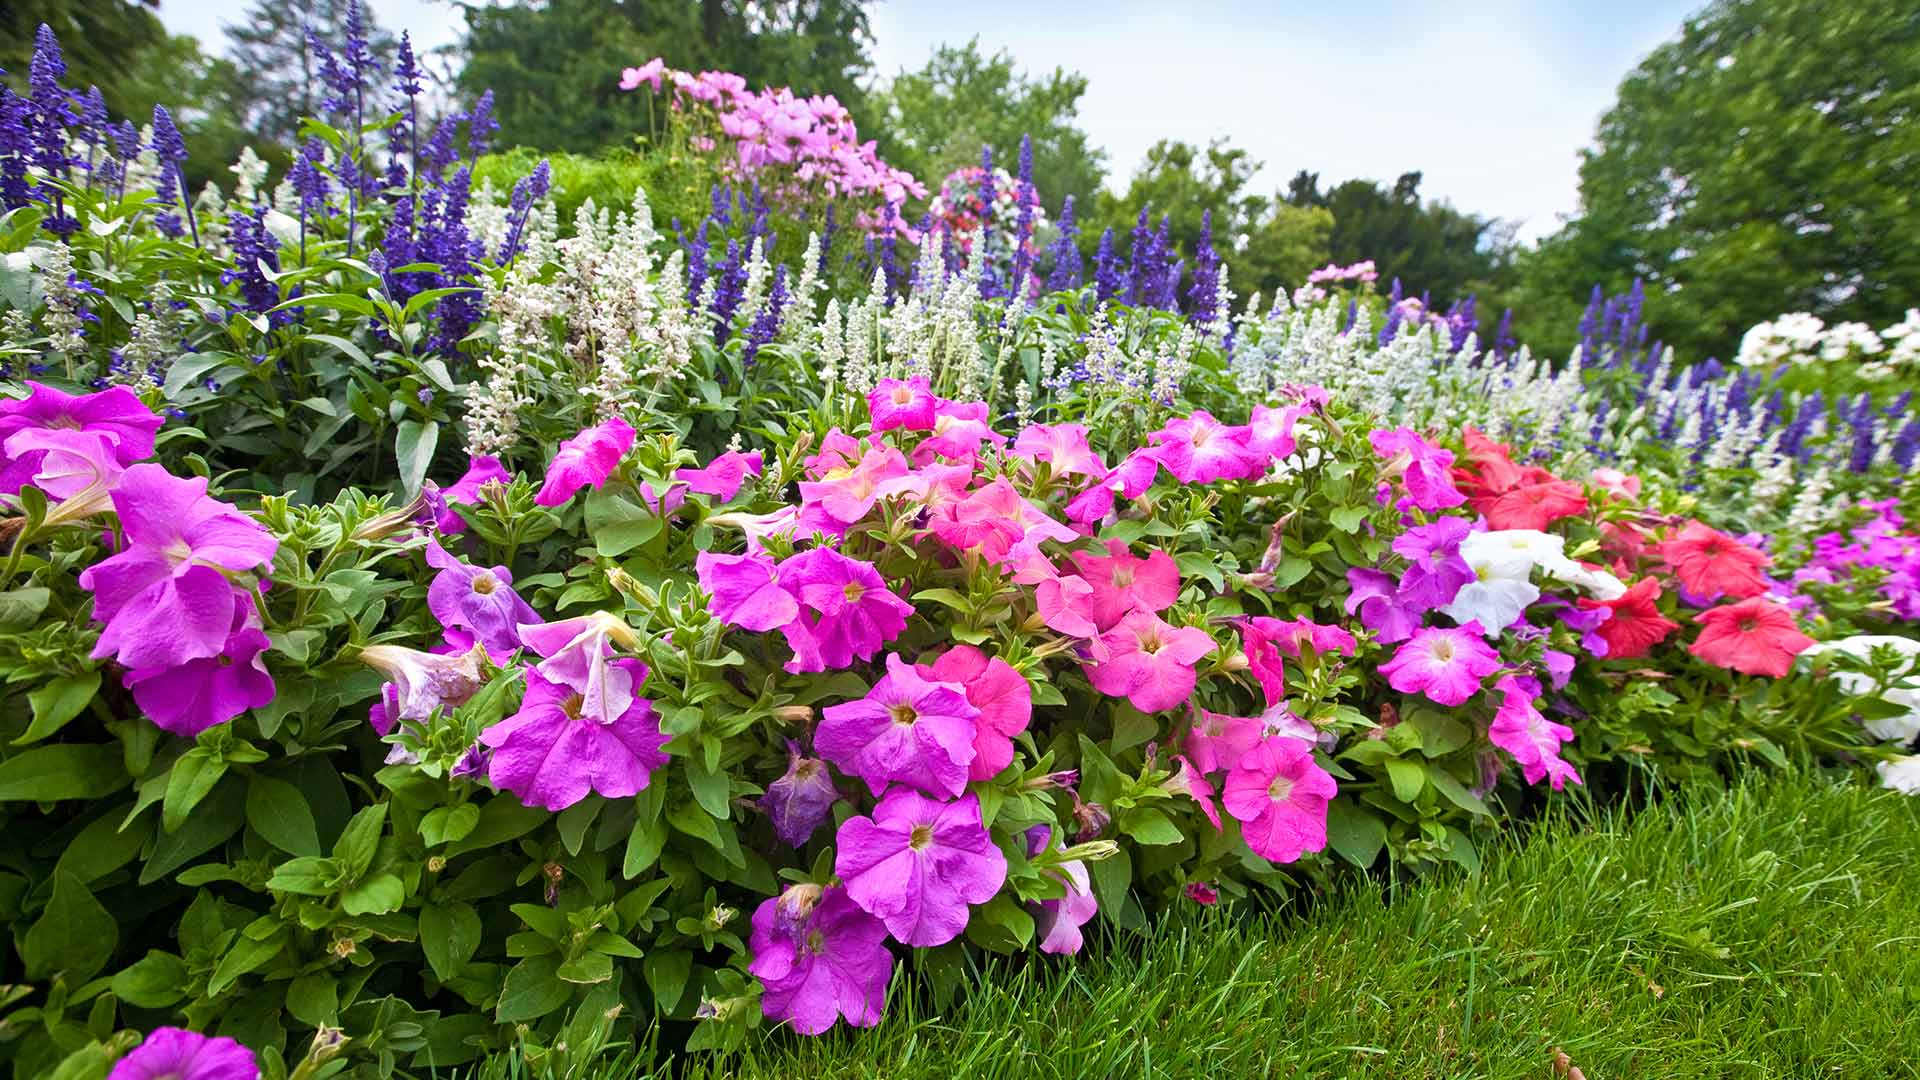 Want Healthy & Beautiful Plants? You Need to Trim & Prune Them!